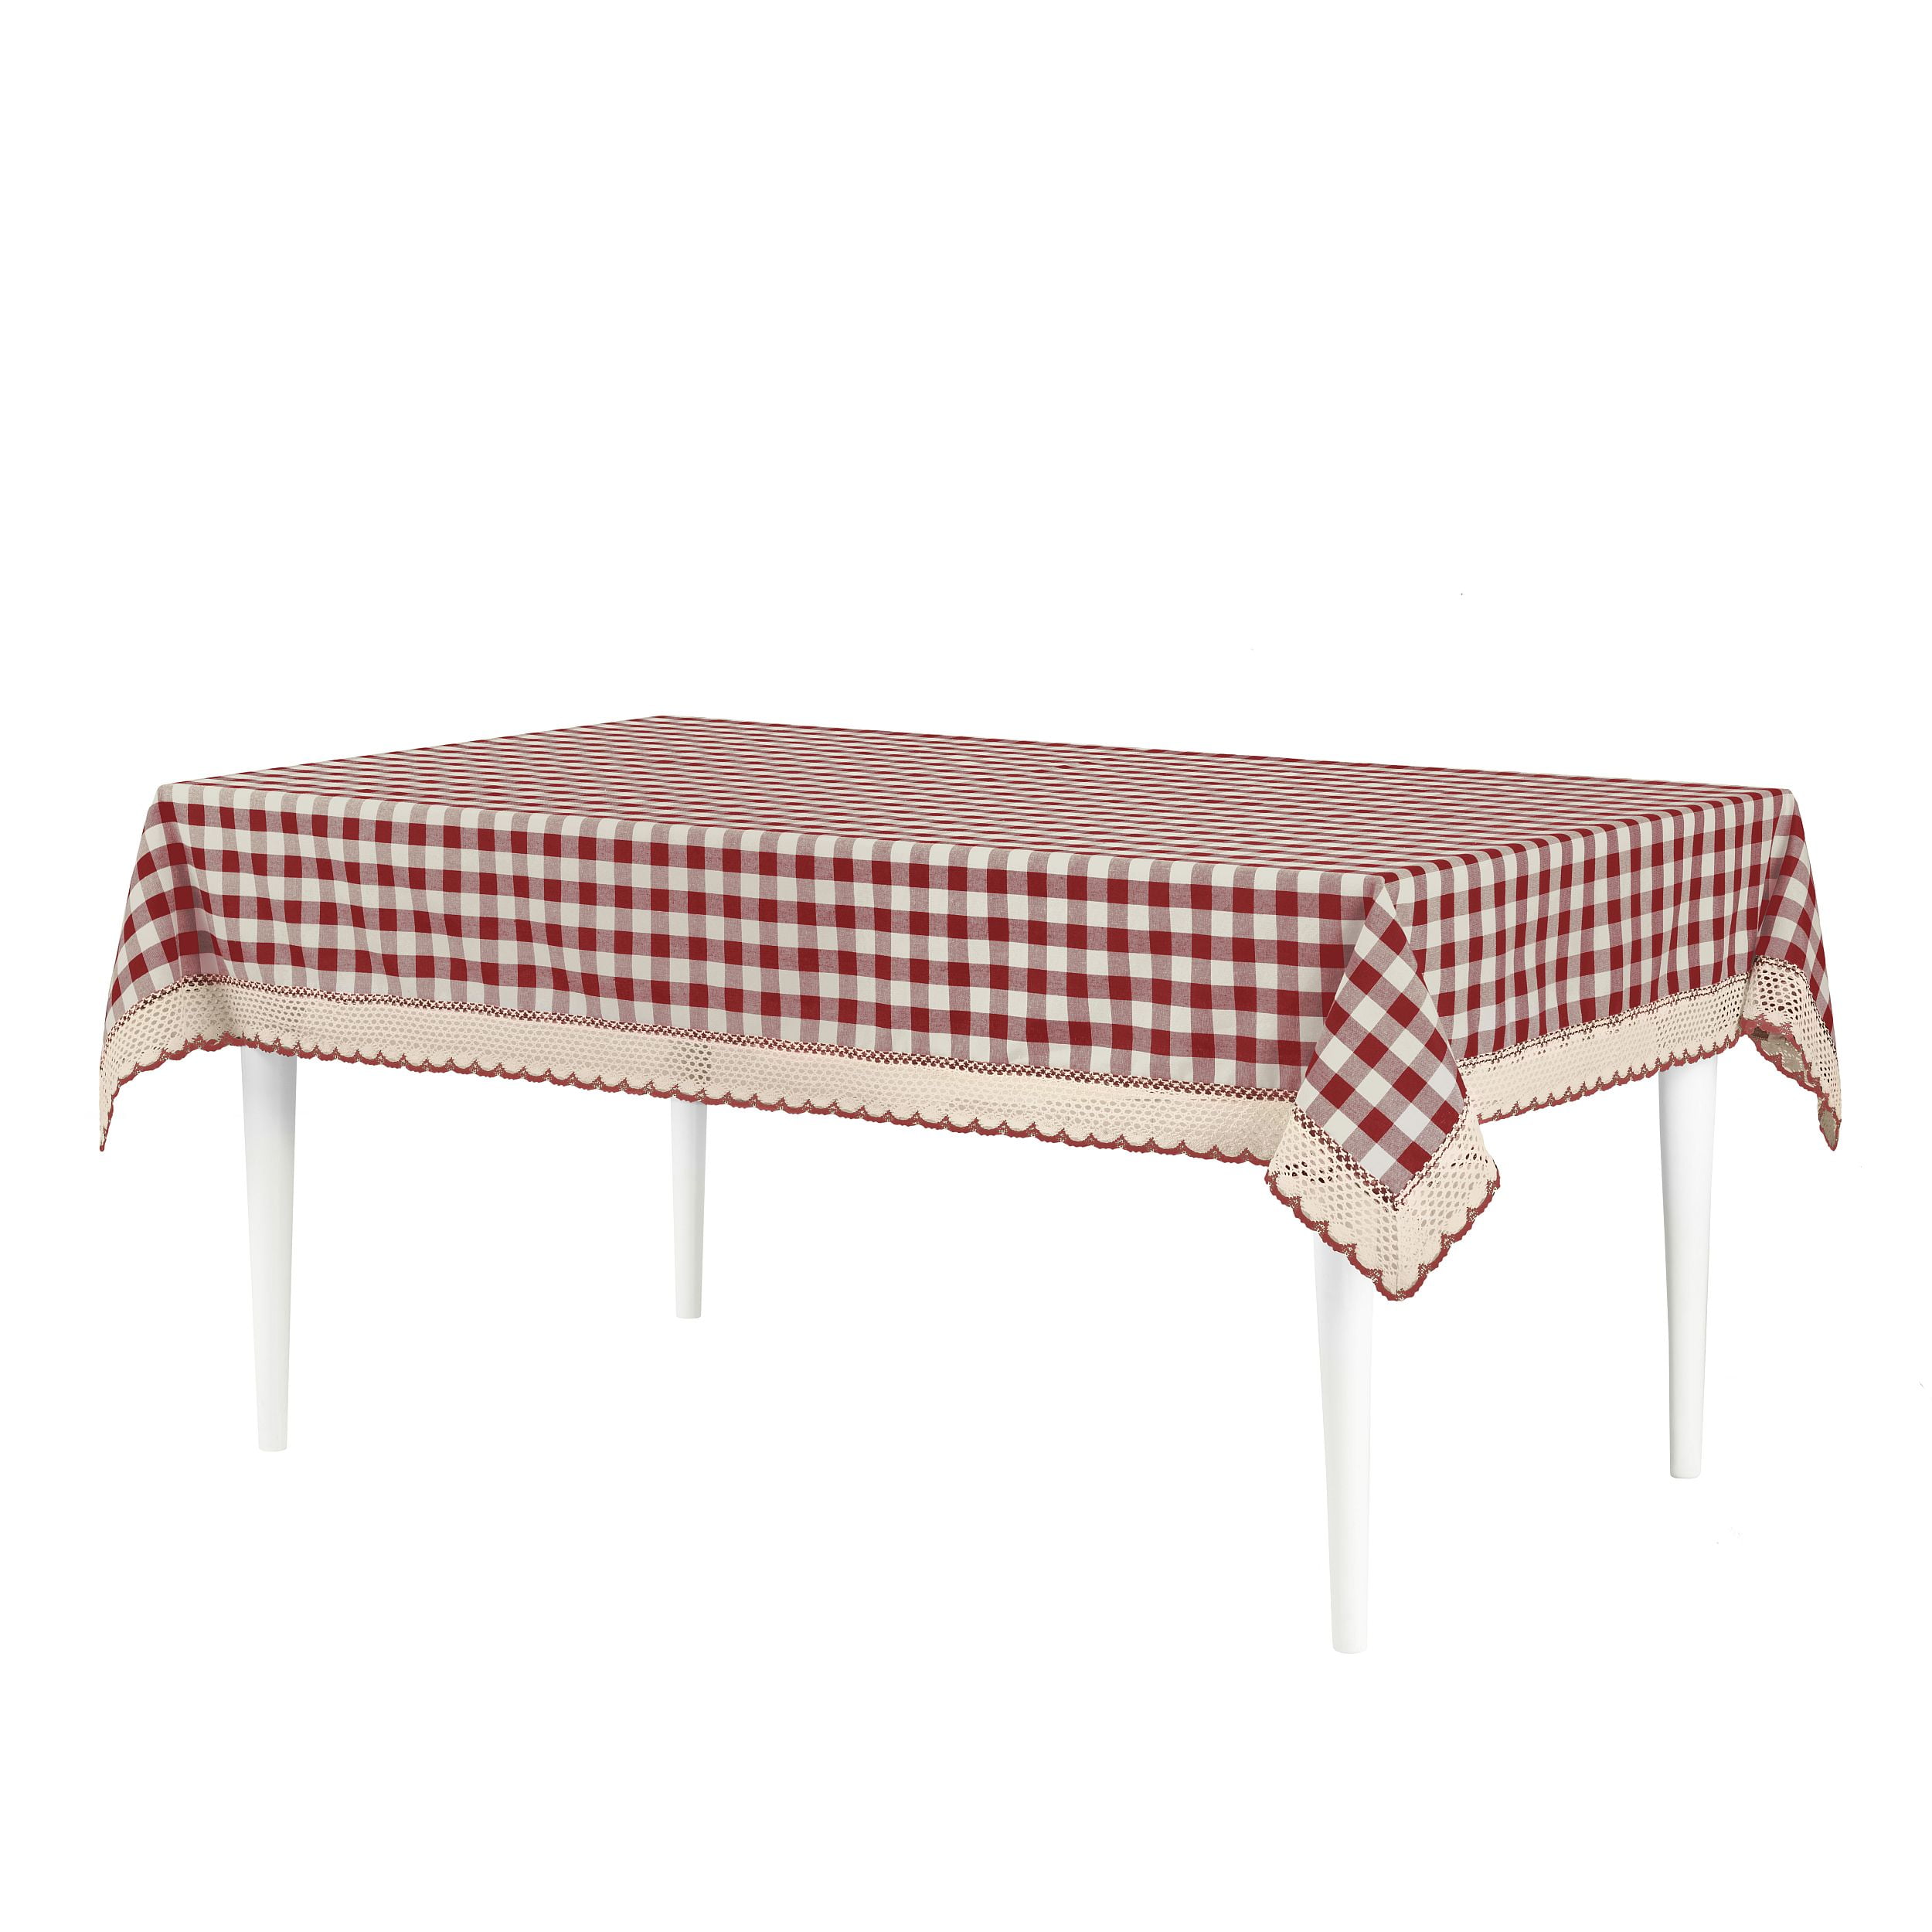 Picture of Achim BCT120BU24 60 x 120 in. Buffalo Check Tablecloth with Macram Trim Burgundy